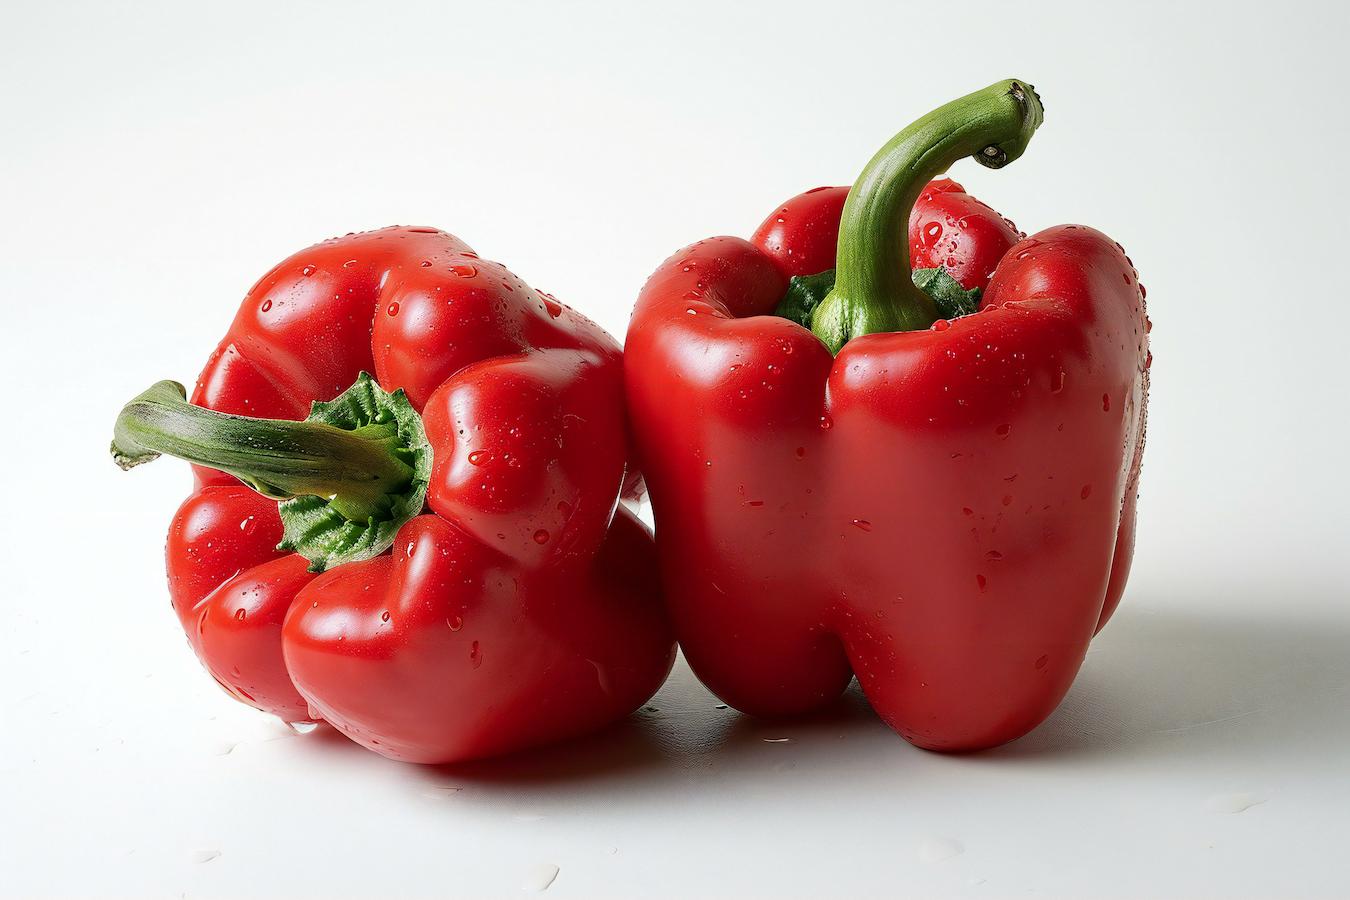 red bell peppers on a white background healthy fats certain foods mediterranean diet fat soluble vitamin e boost the immune system